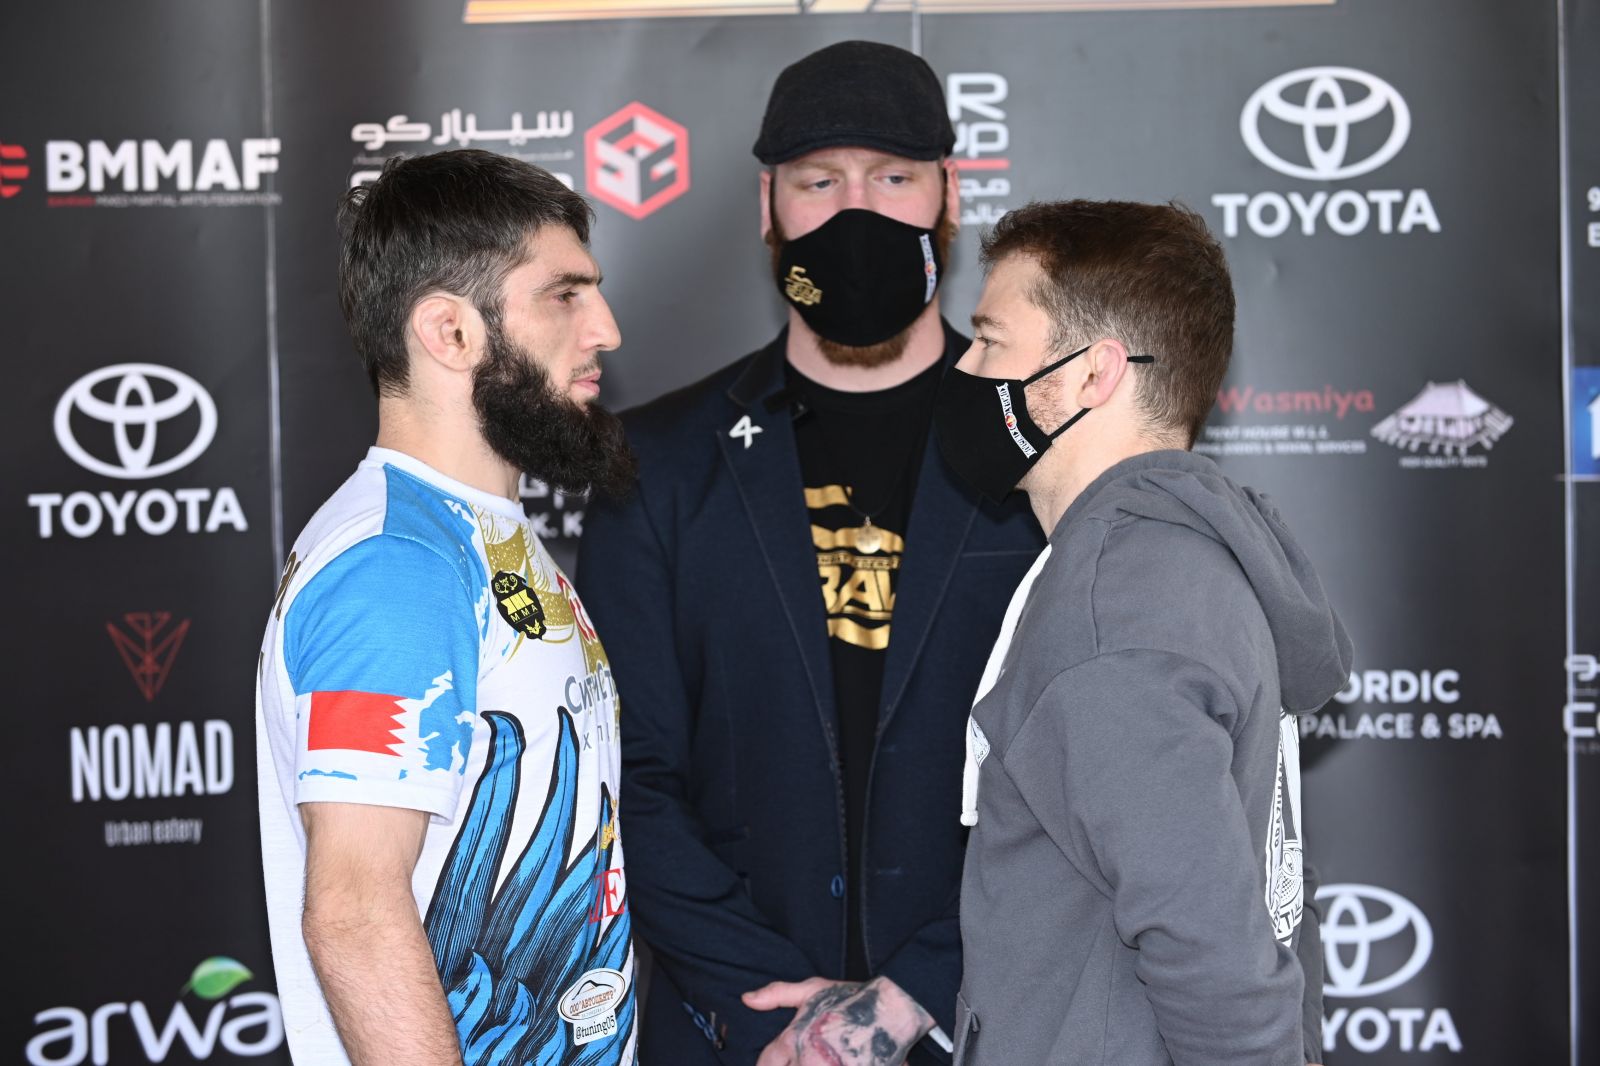 VIDEO Jarrah Al-Silawi and Ismail Naurdiev Come Close To Starting Brawl At BRAVE CF 50 Face-Offs